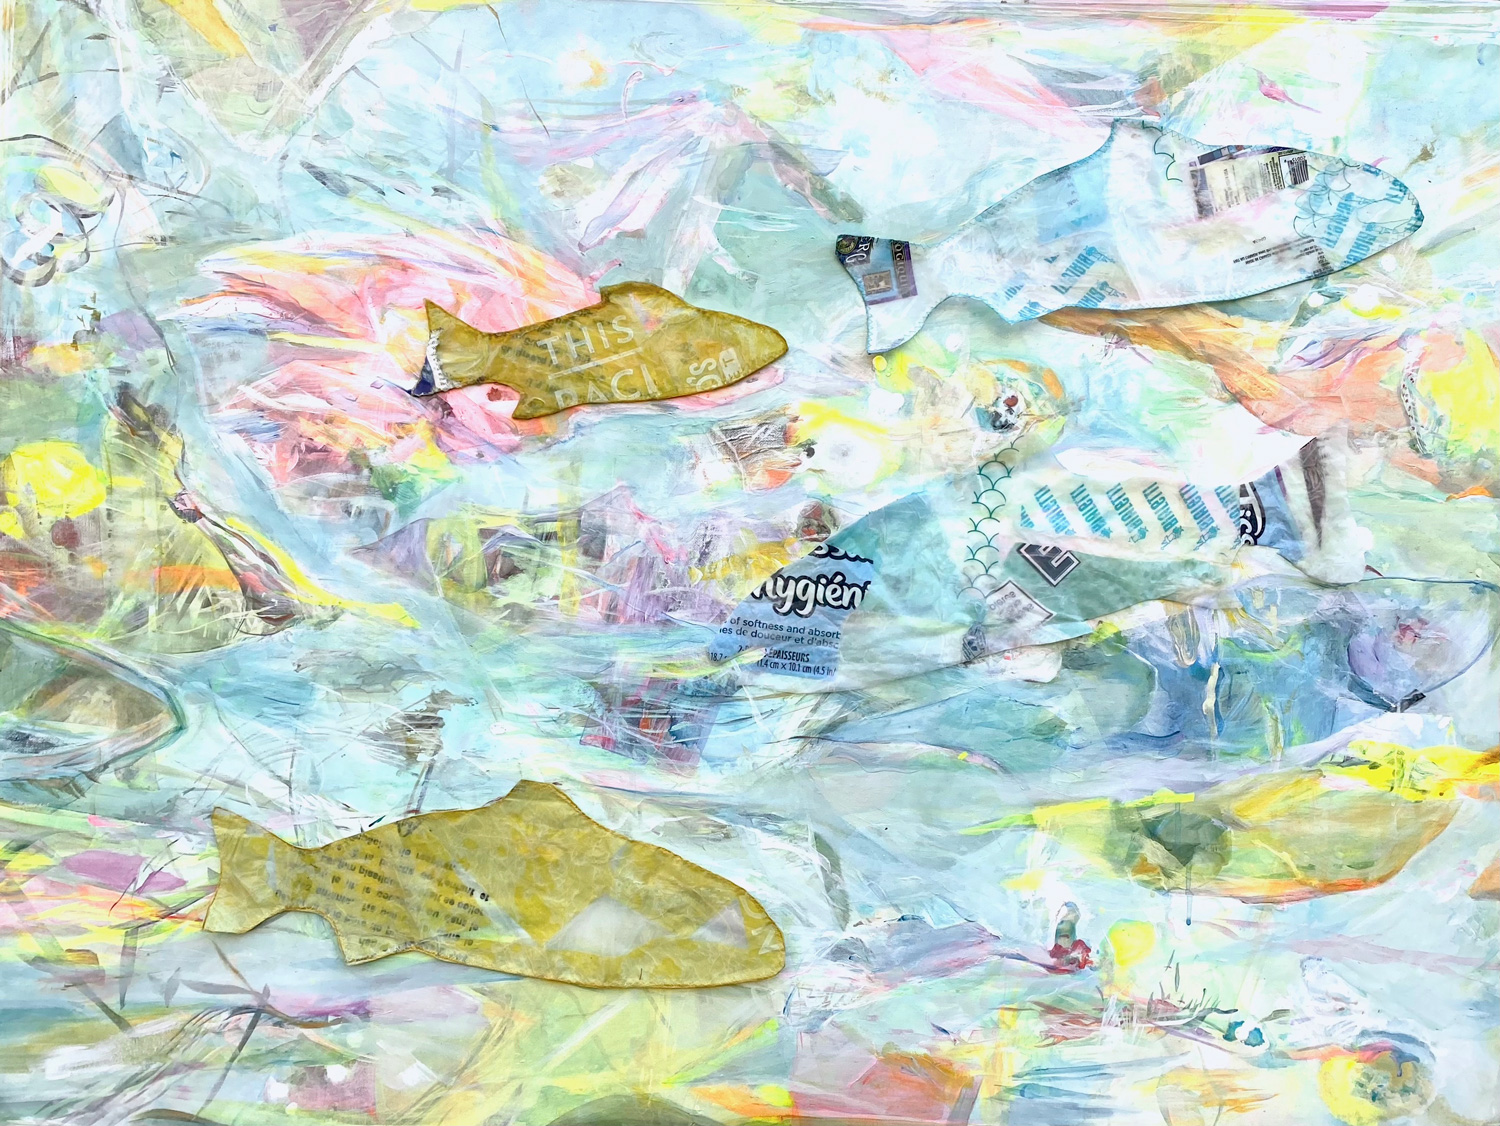 13.Entanglement-acrylic-paint-with-sewn-plastic-bag-fish-elements-40-x-36_-2022-3800